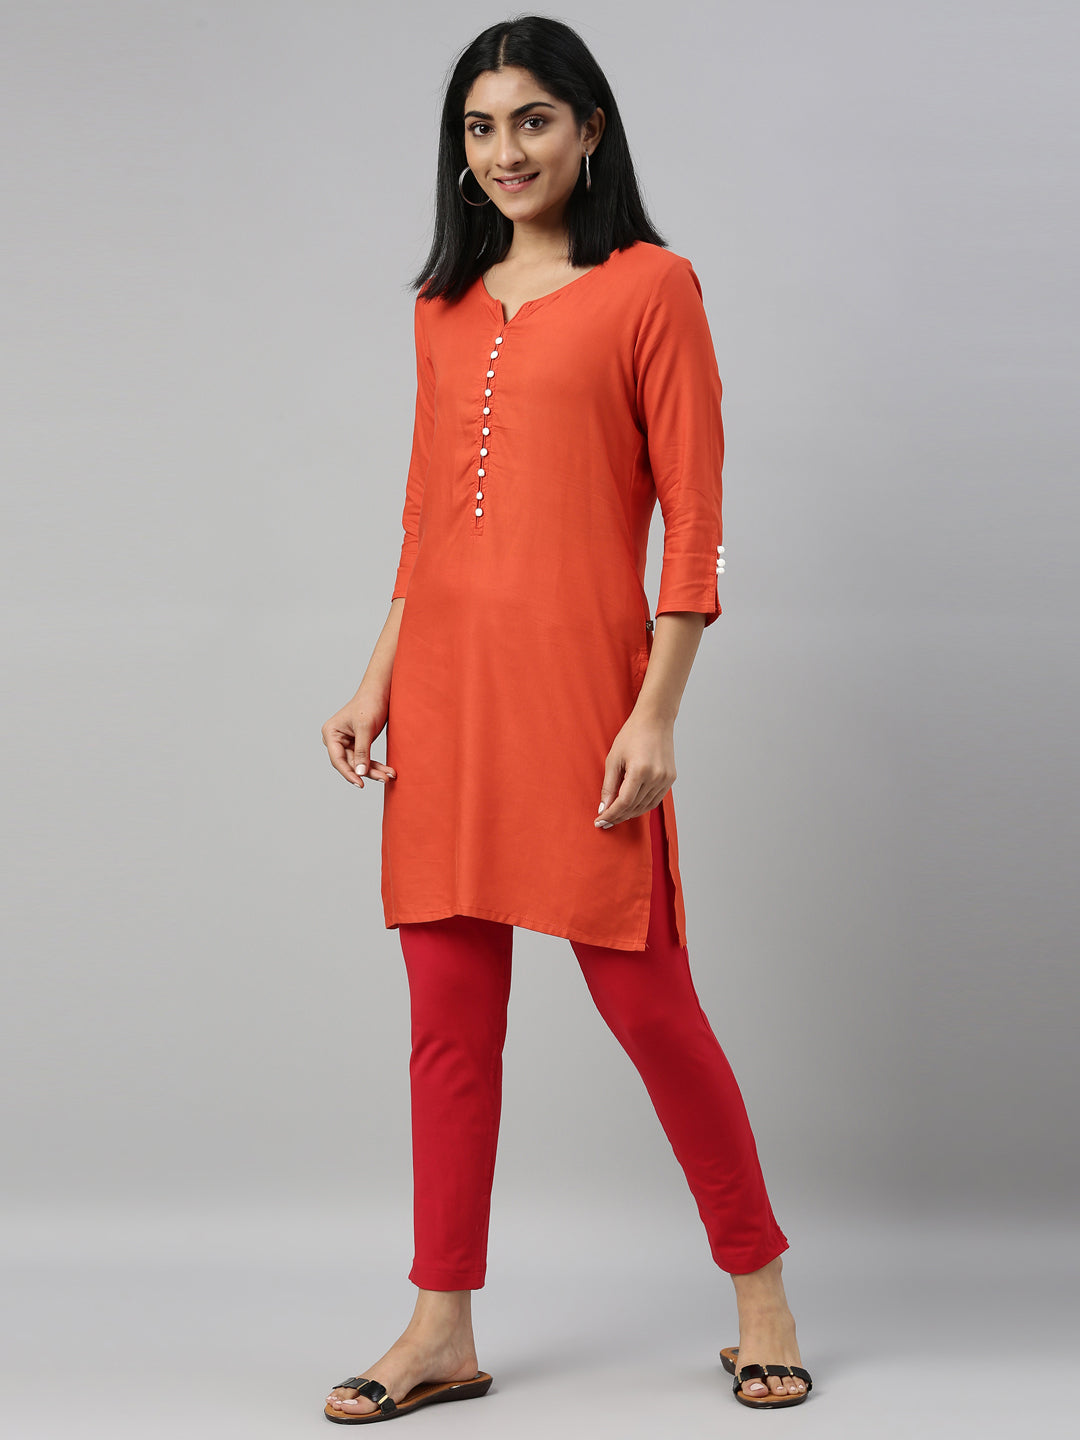 Buy GO COLORS Womens 4 Pocket Solid Kurti Pants | Shoppers Stop